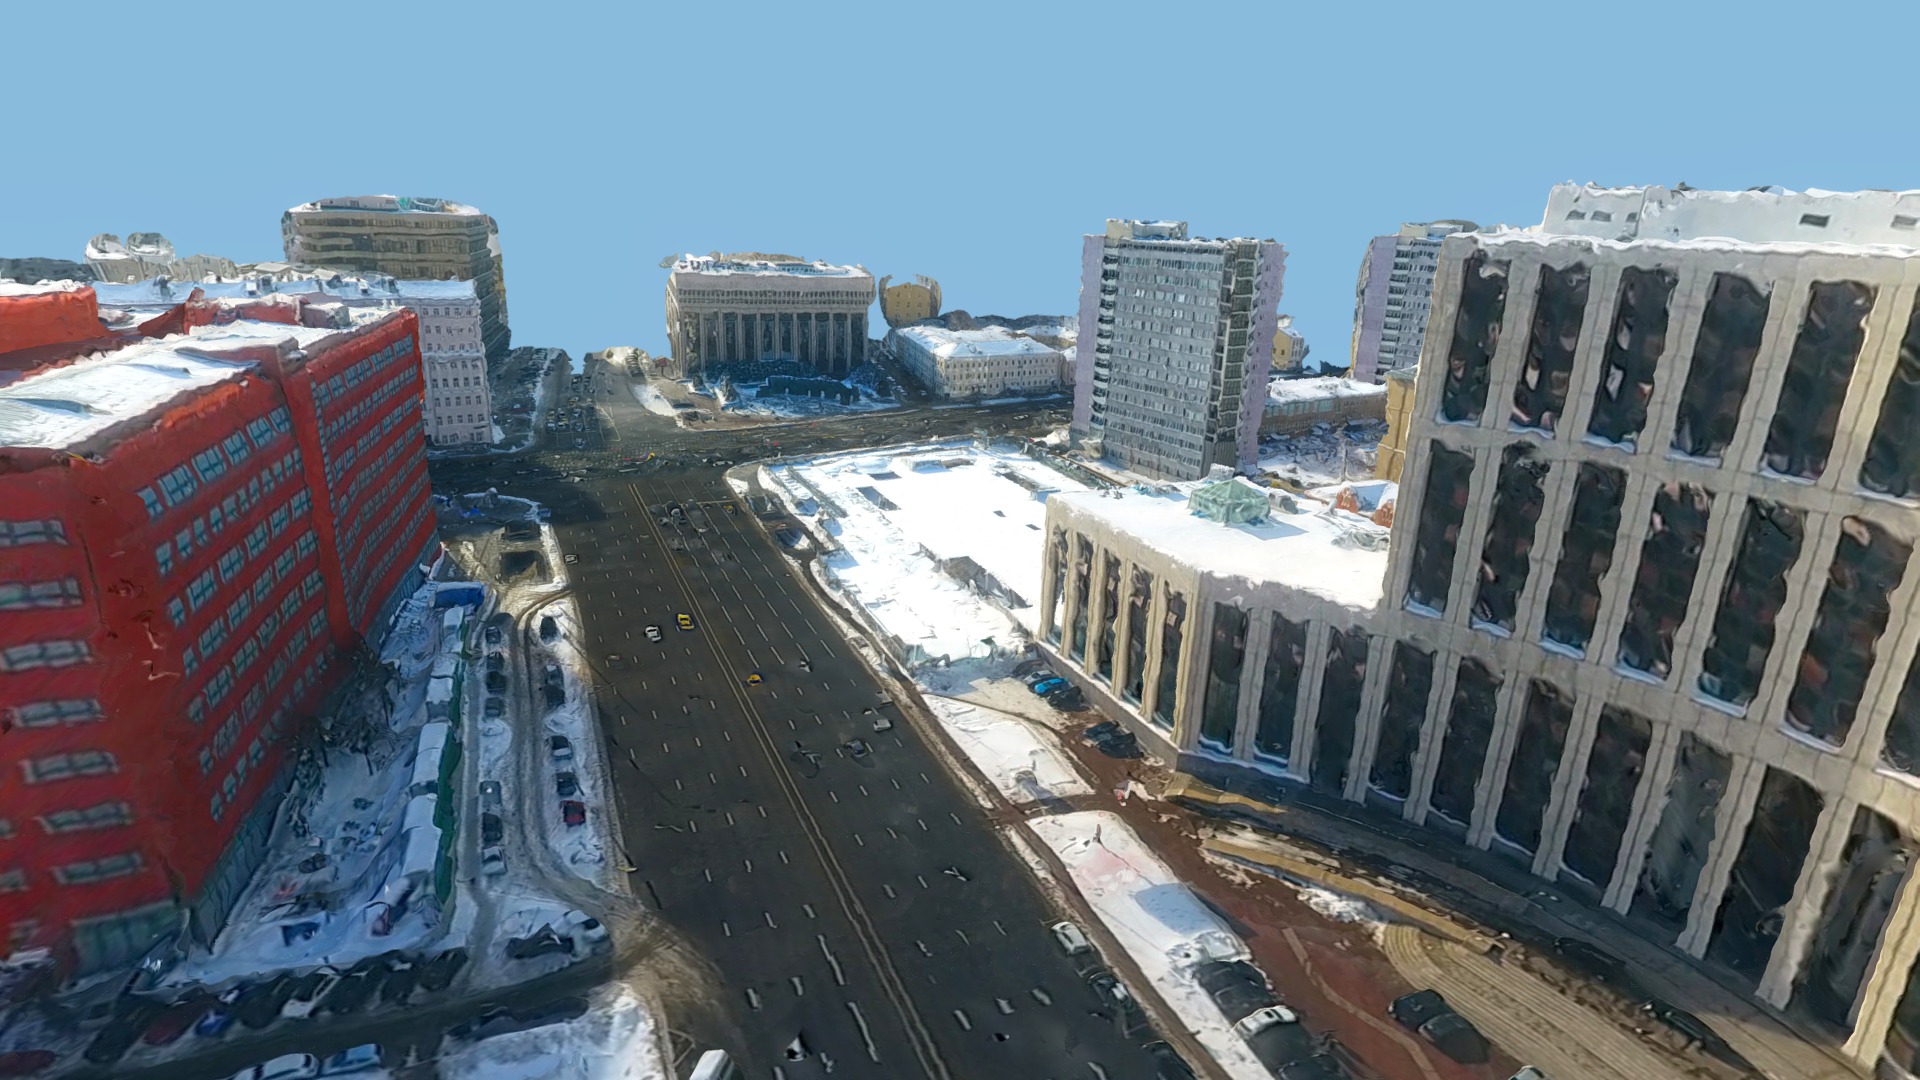 3D model Saharov Academic Avenue - This is a 3D model of the Saharov Academic Avenue. The 3D model is about a city with buildings and streets.